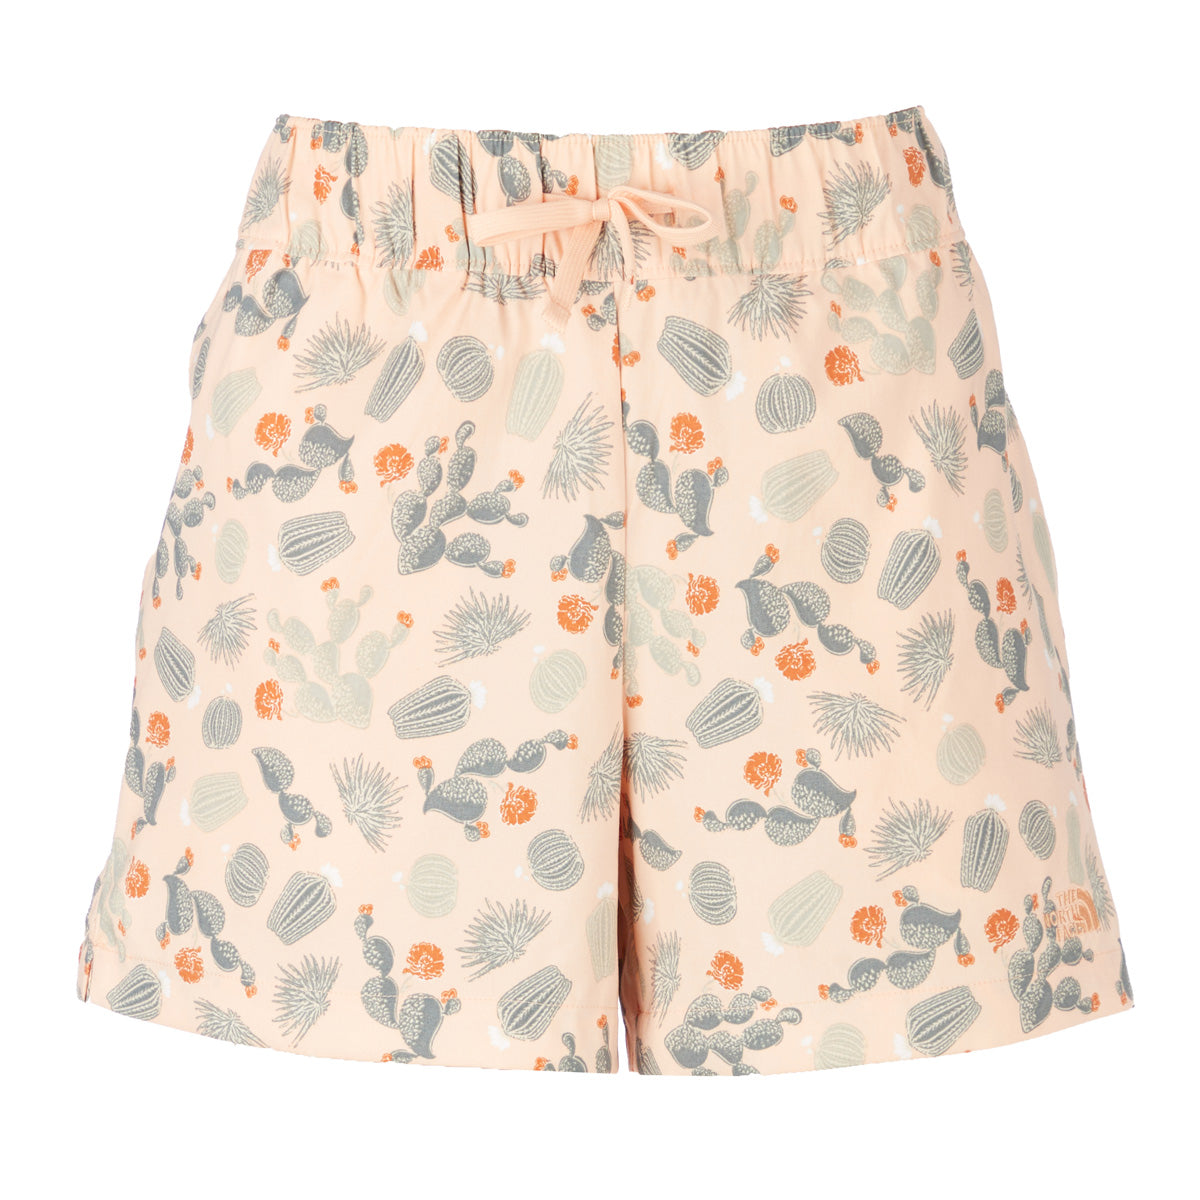 The North Face Women's Printed Class V Short (Apricot Ice Cacti Print, M)